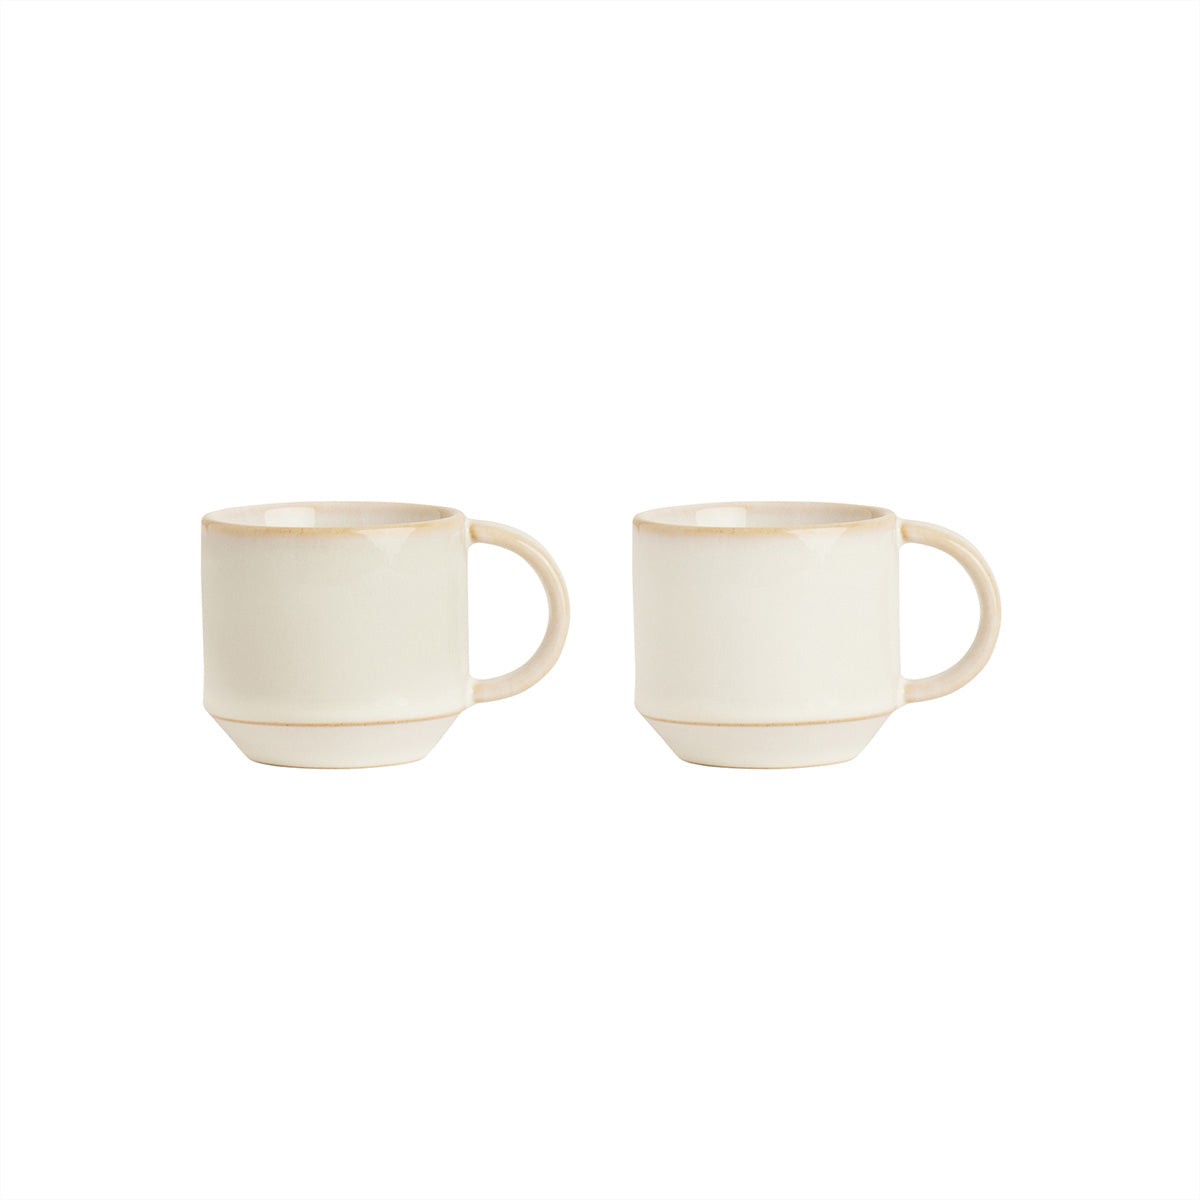 OYOY LIVING Yuka Espresso Cup - Pack of 2 Dining Ware 102 Offwhite